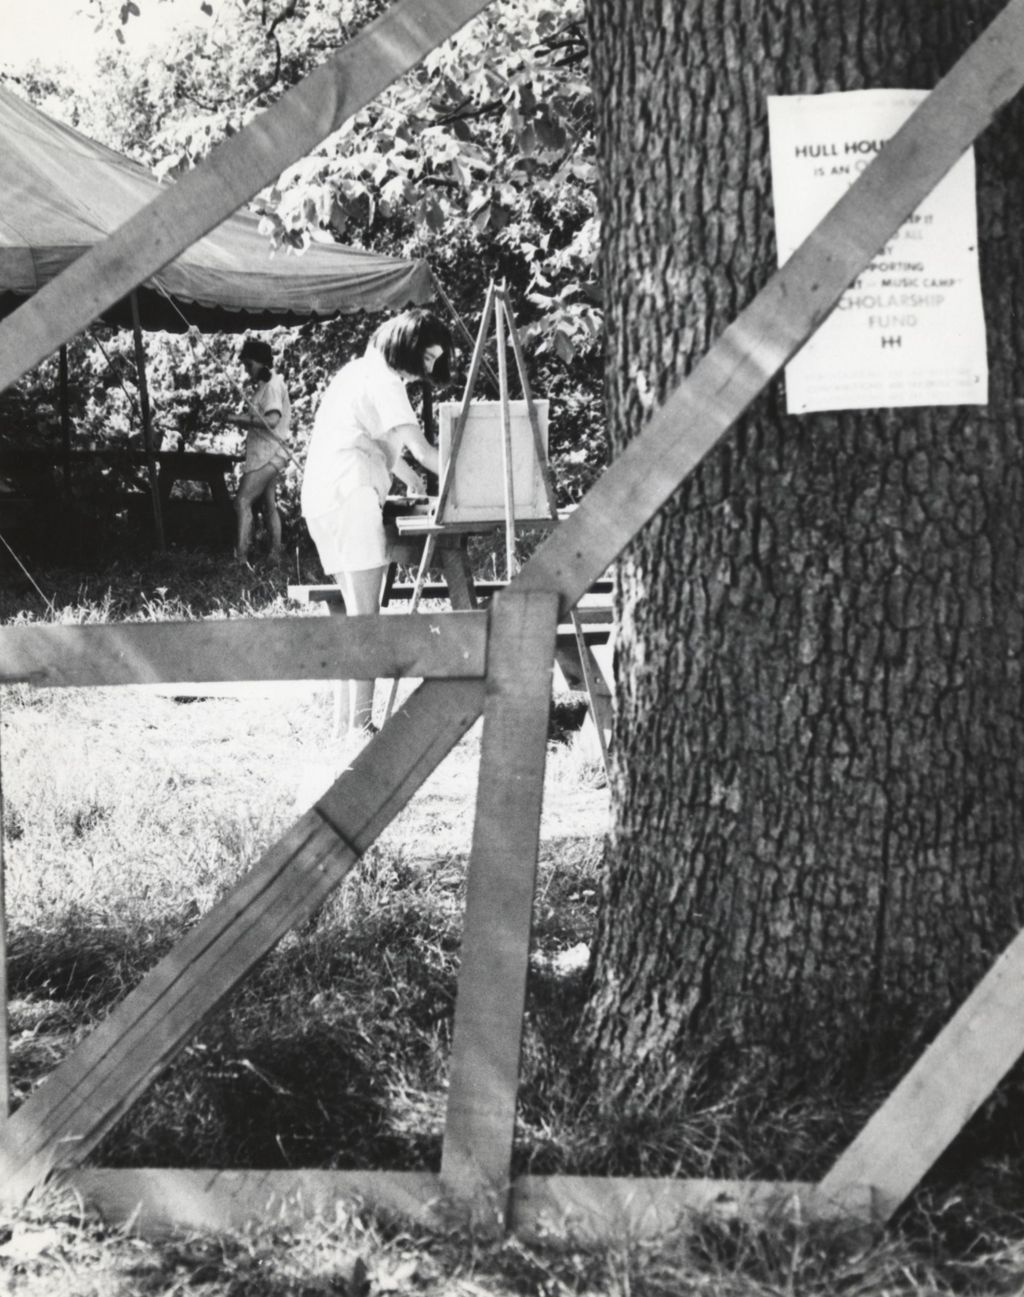 Miniature of Girl with easel by tent and large tree